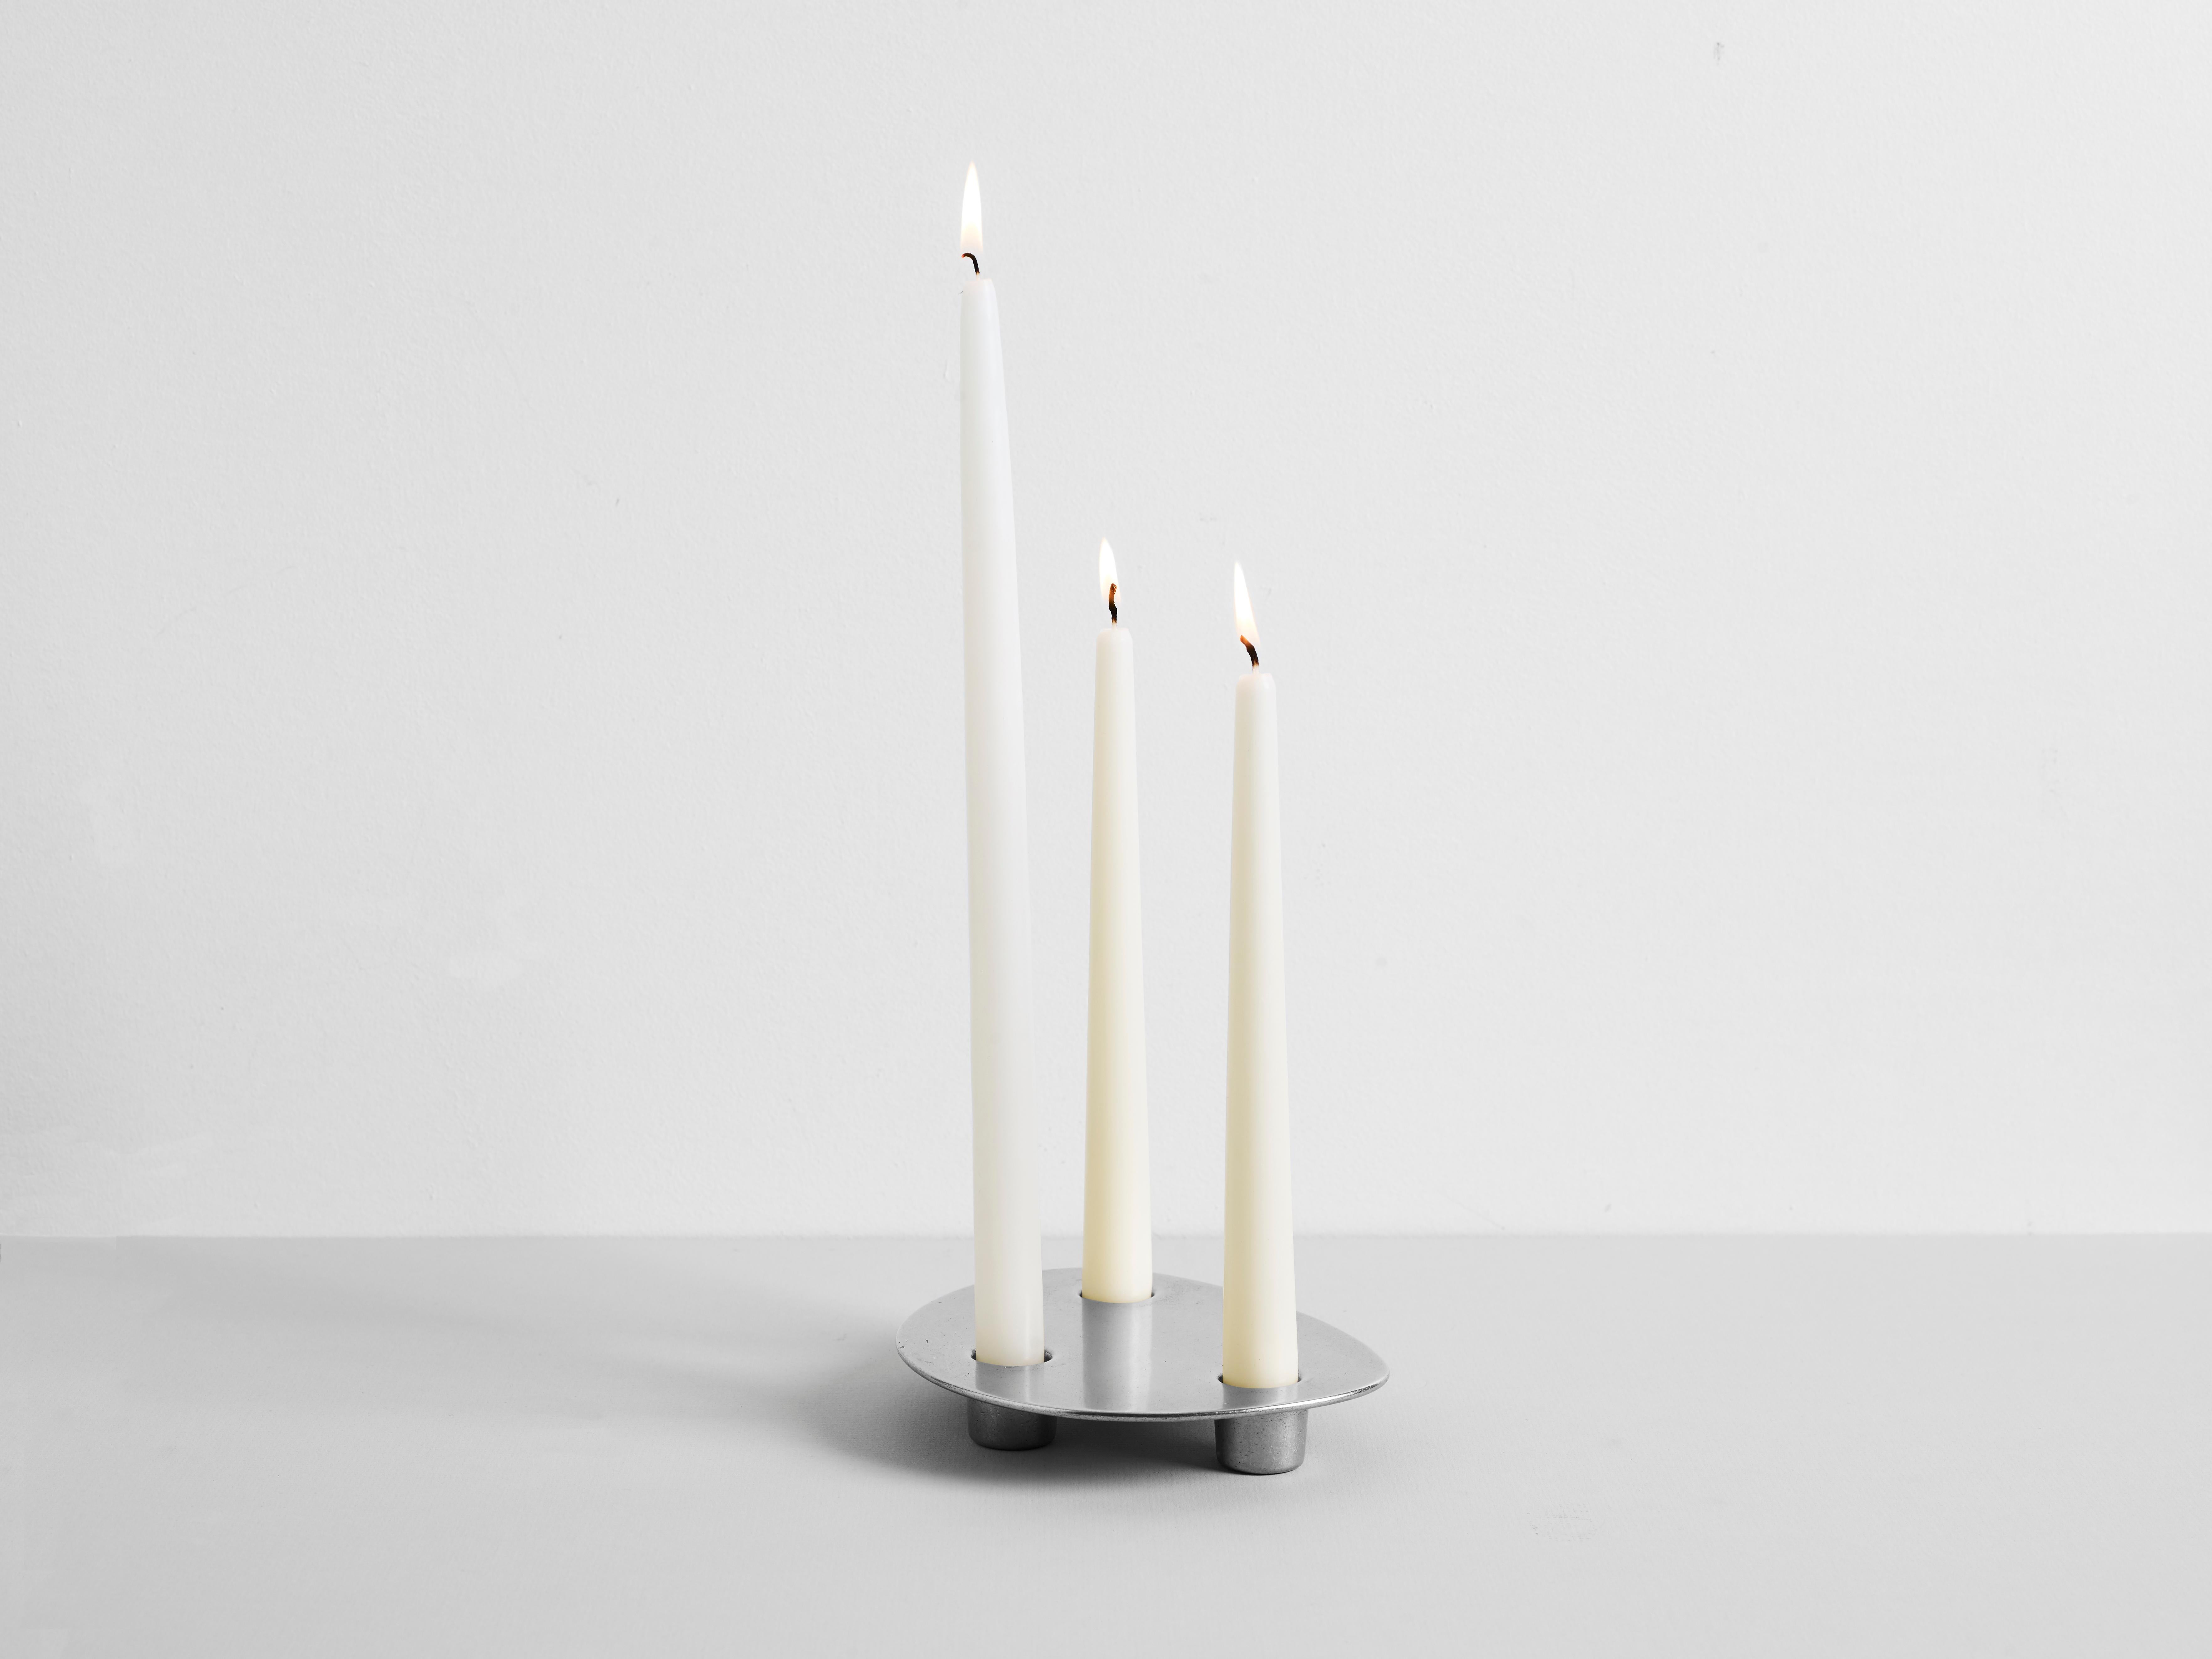 Brass Trio Candle Holder Henry Wilson
Dimensions: D 18 x H 3 cm
Materials: Brass

Trio holds three candles in a solid, hand poured, brass form. 

Trio candleholder is manufactured in small batches, slight variations will occur from piece to piece.